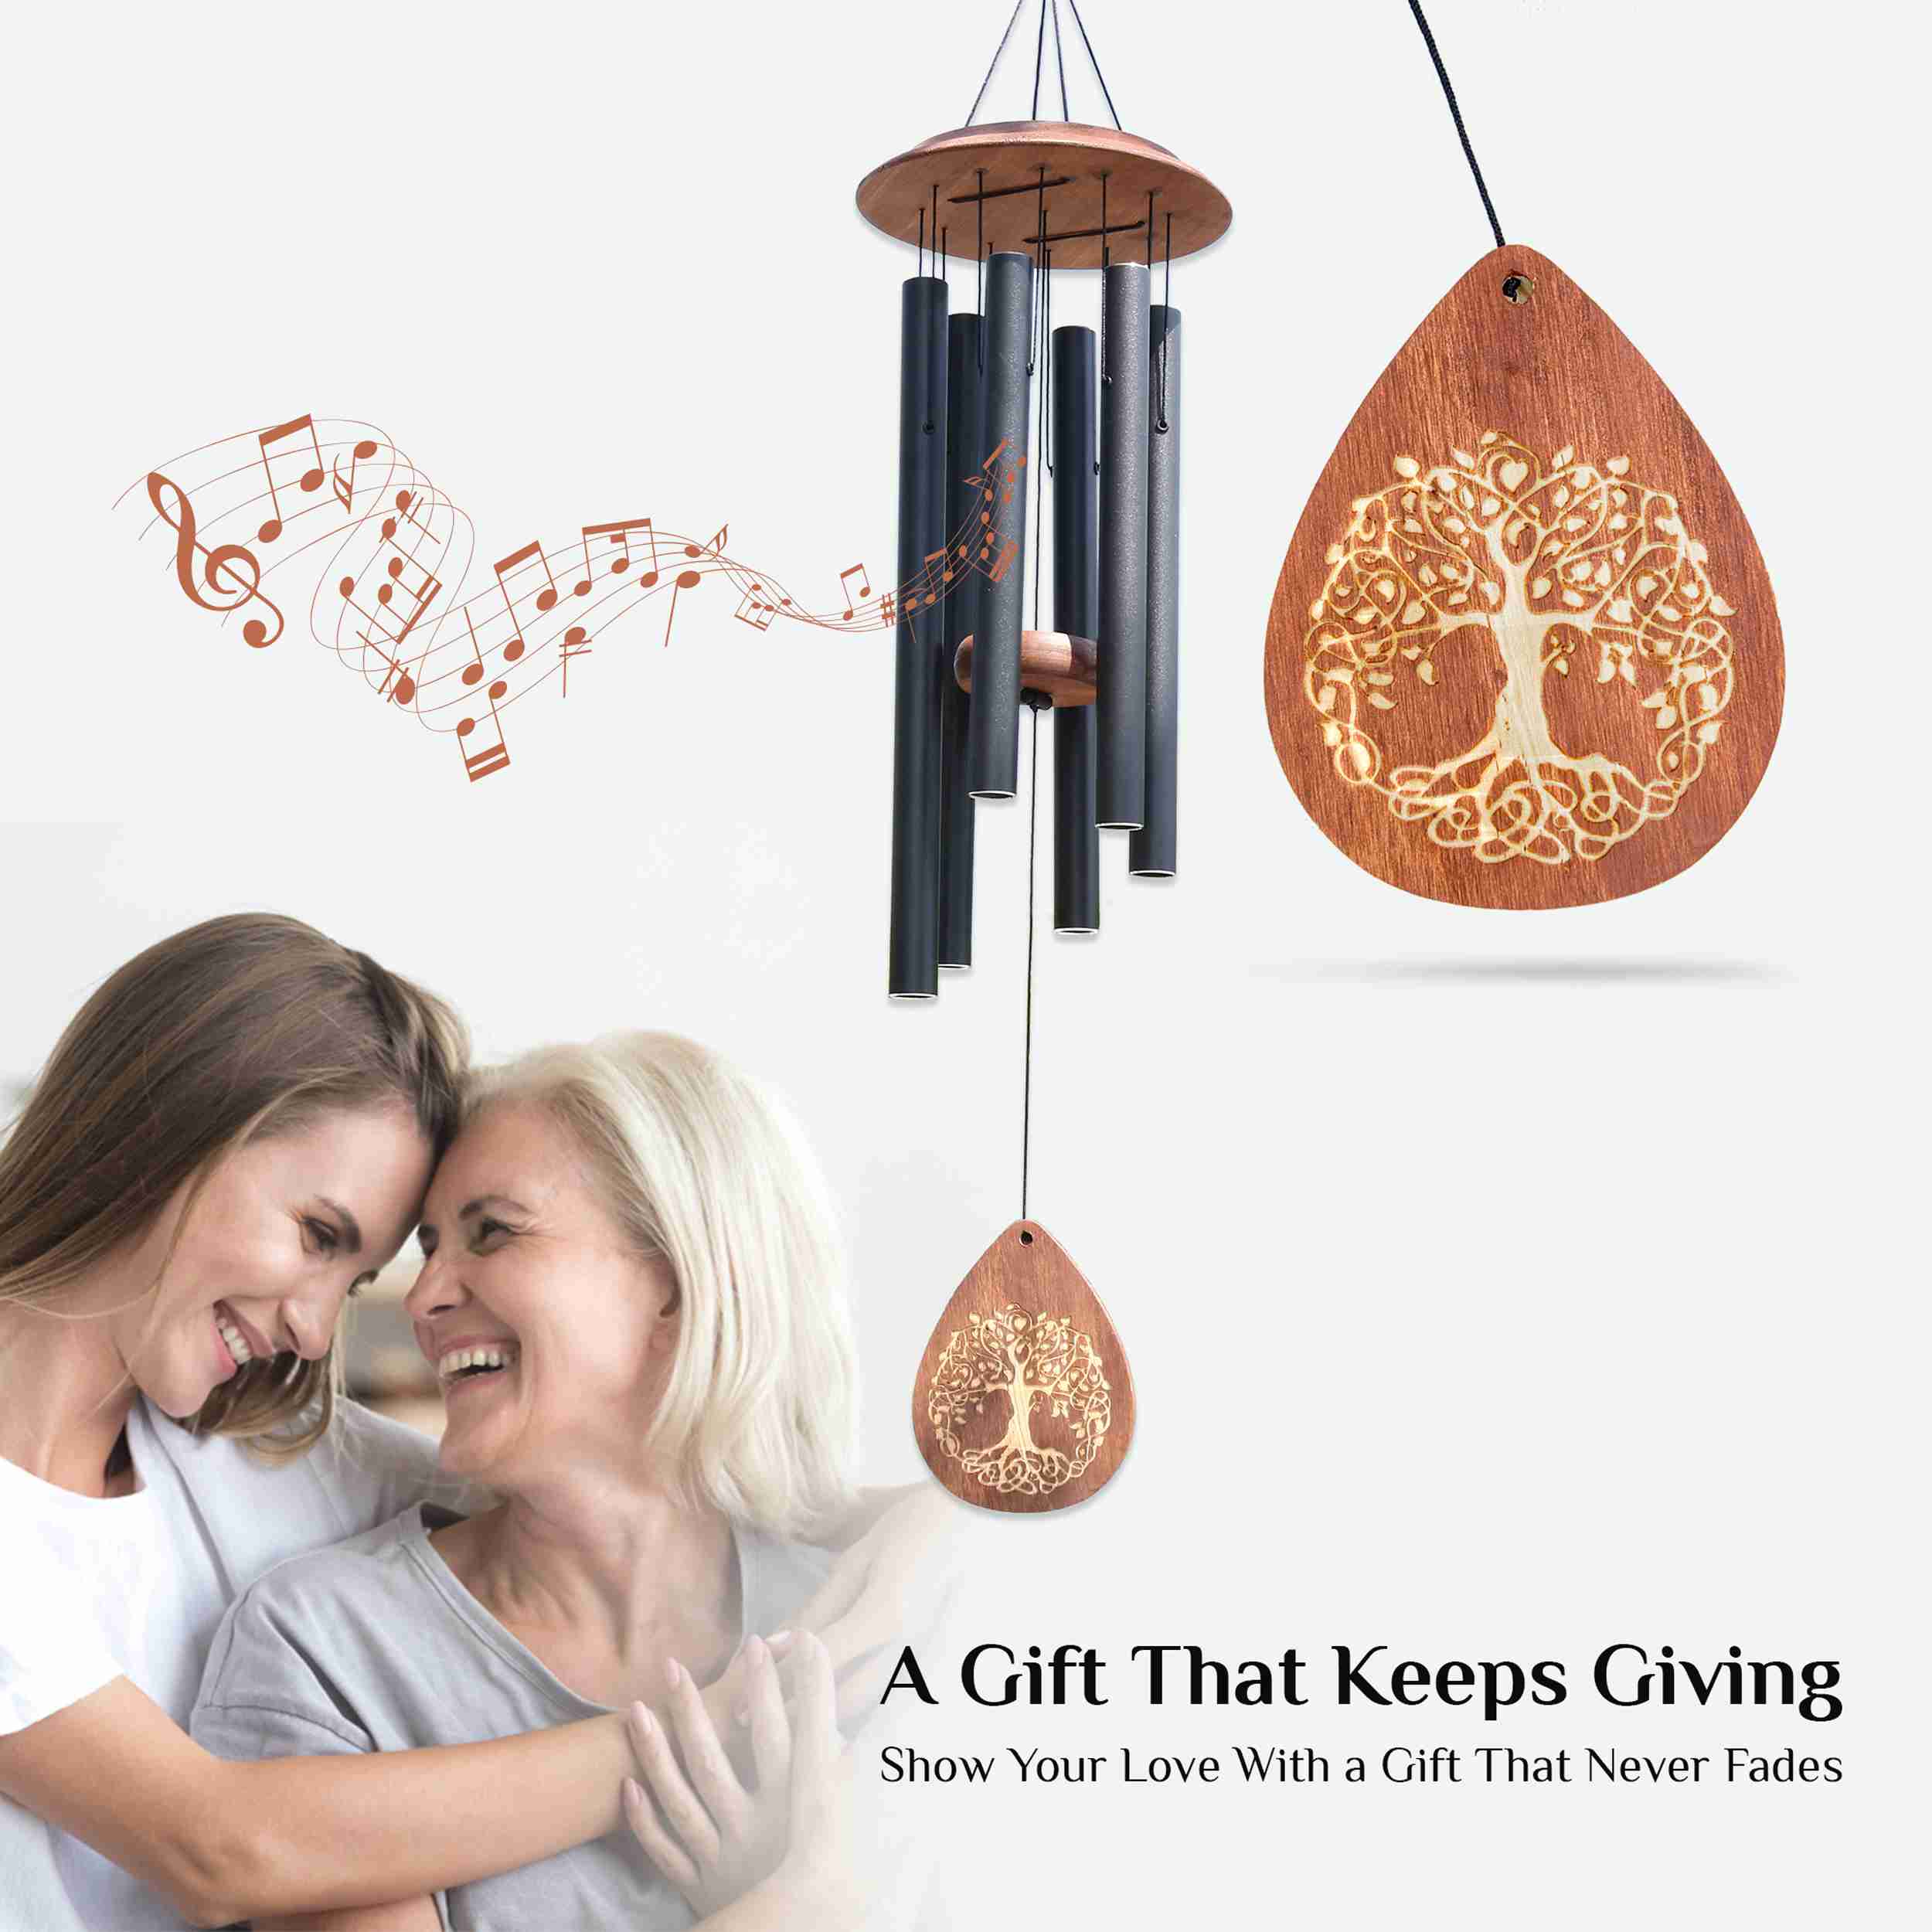 wind-chimes-christmas-gift-garden-patio-decor-zen-meditation with discount code